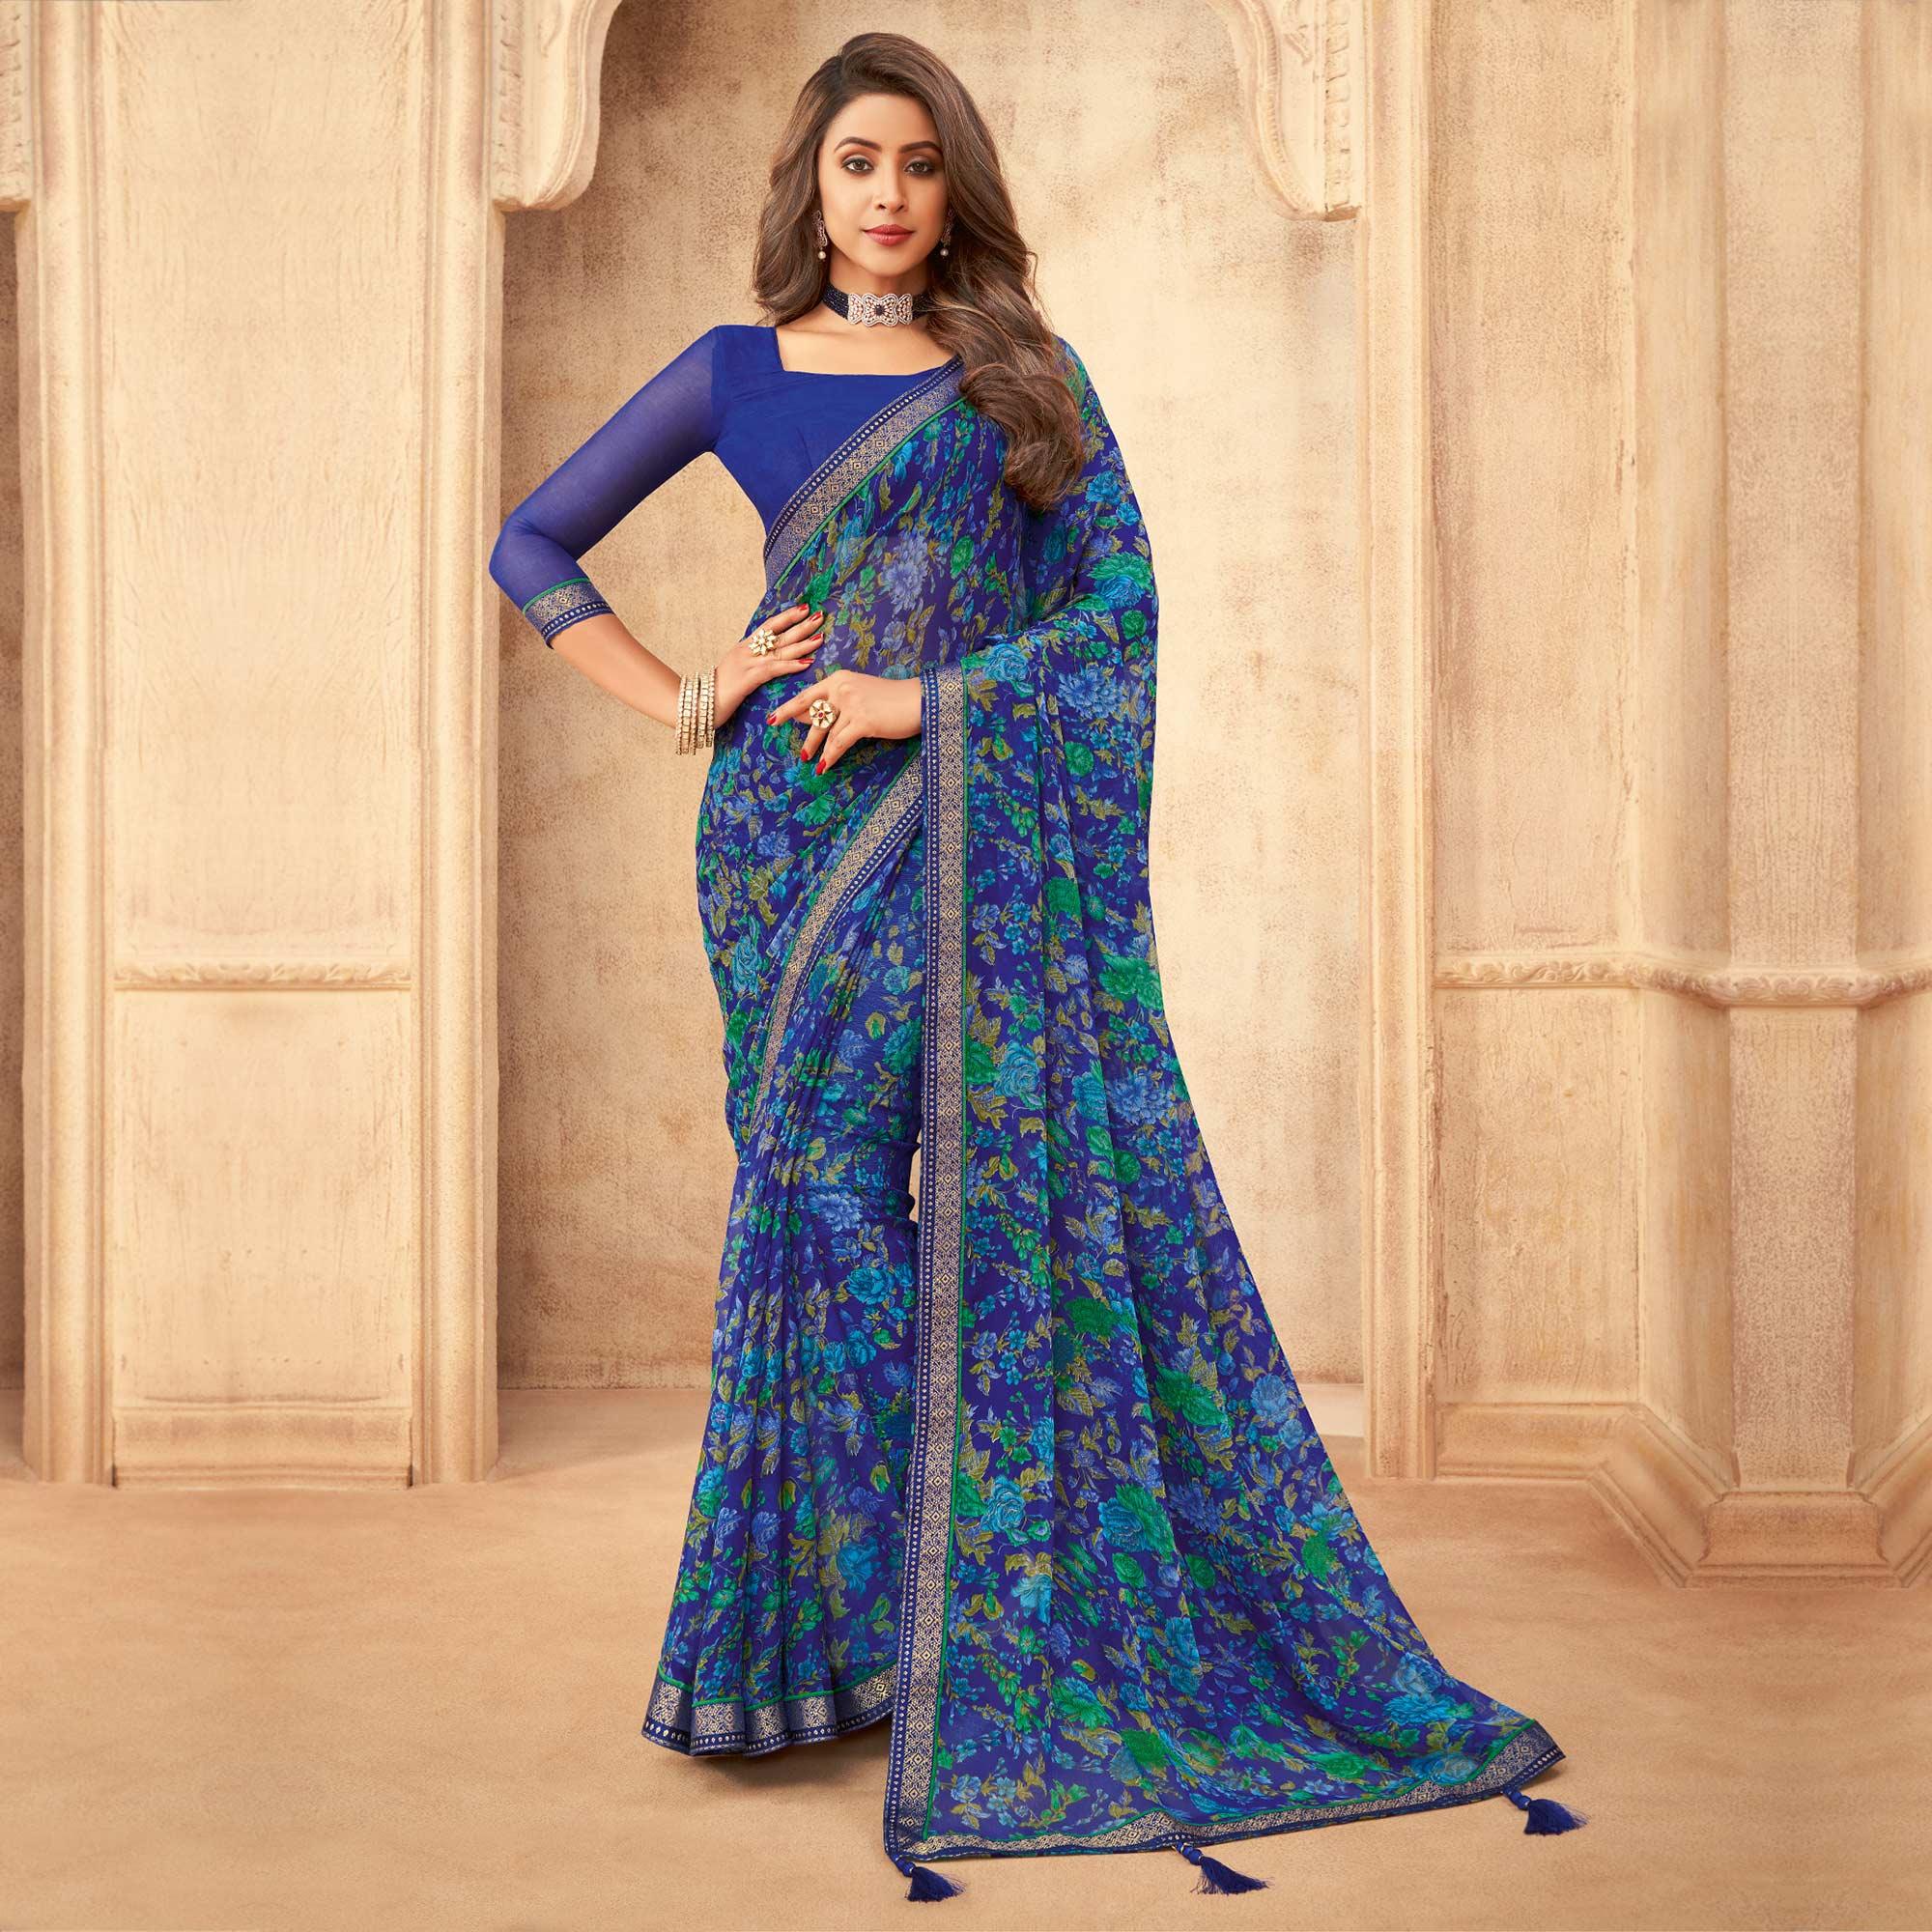 Blue Casual Wear Floral Printed with Tassels Chiffon Saree - Peachmode